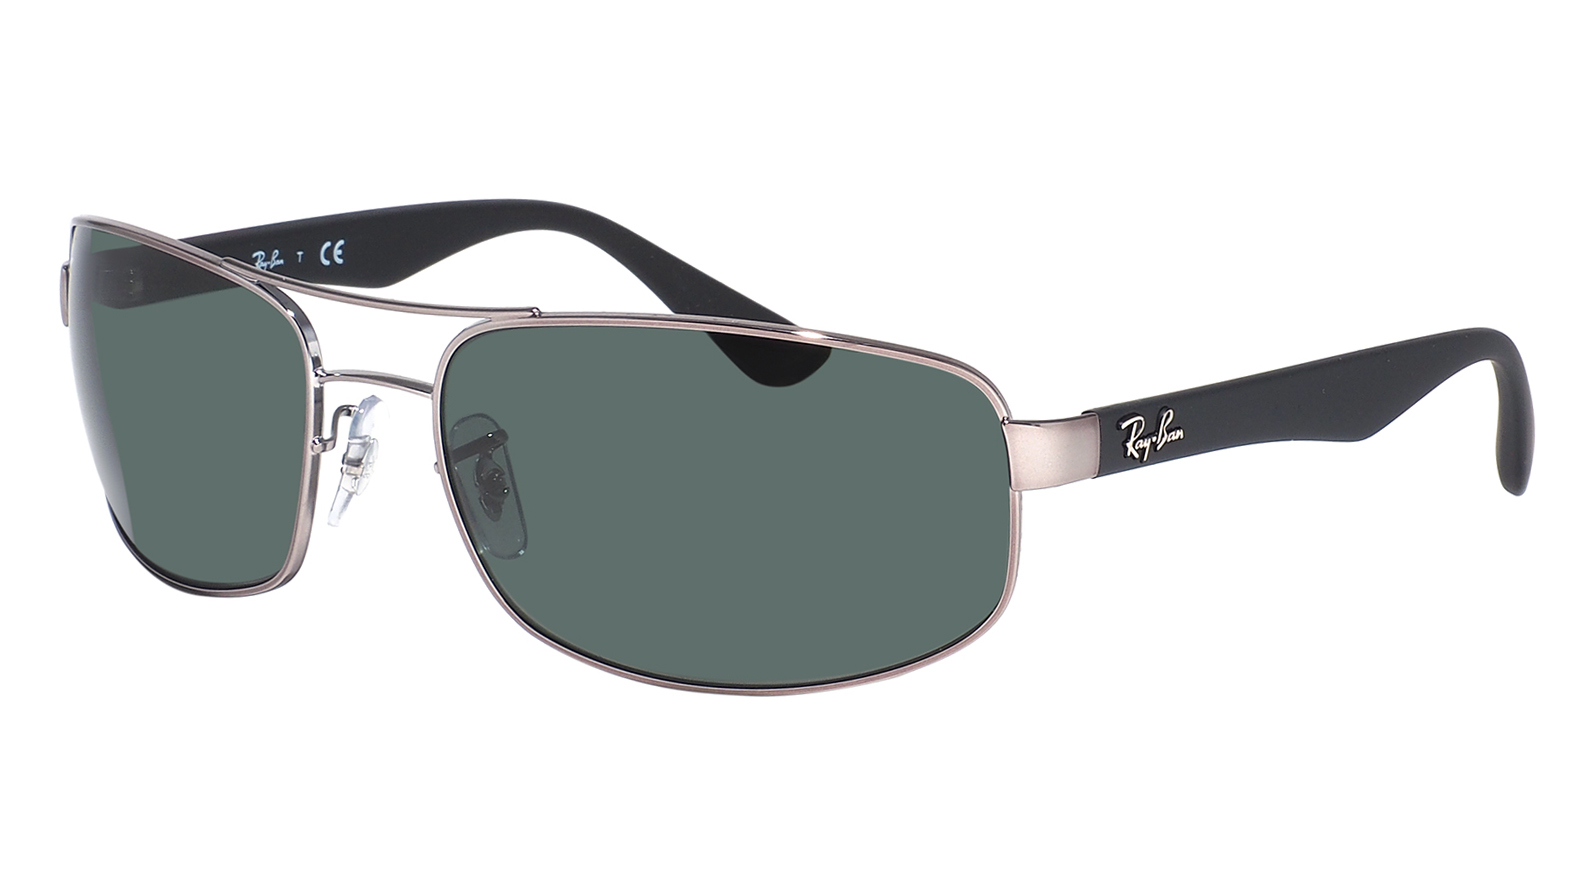 Ray-Ban Active Lifestyle RB 3445 004 ray ban active lifestyle rx 7047 5847